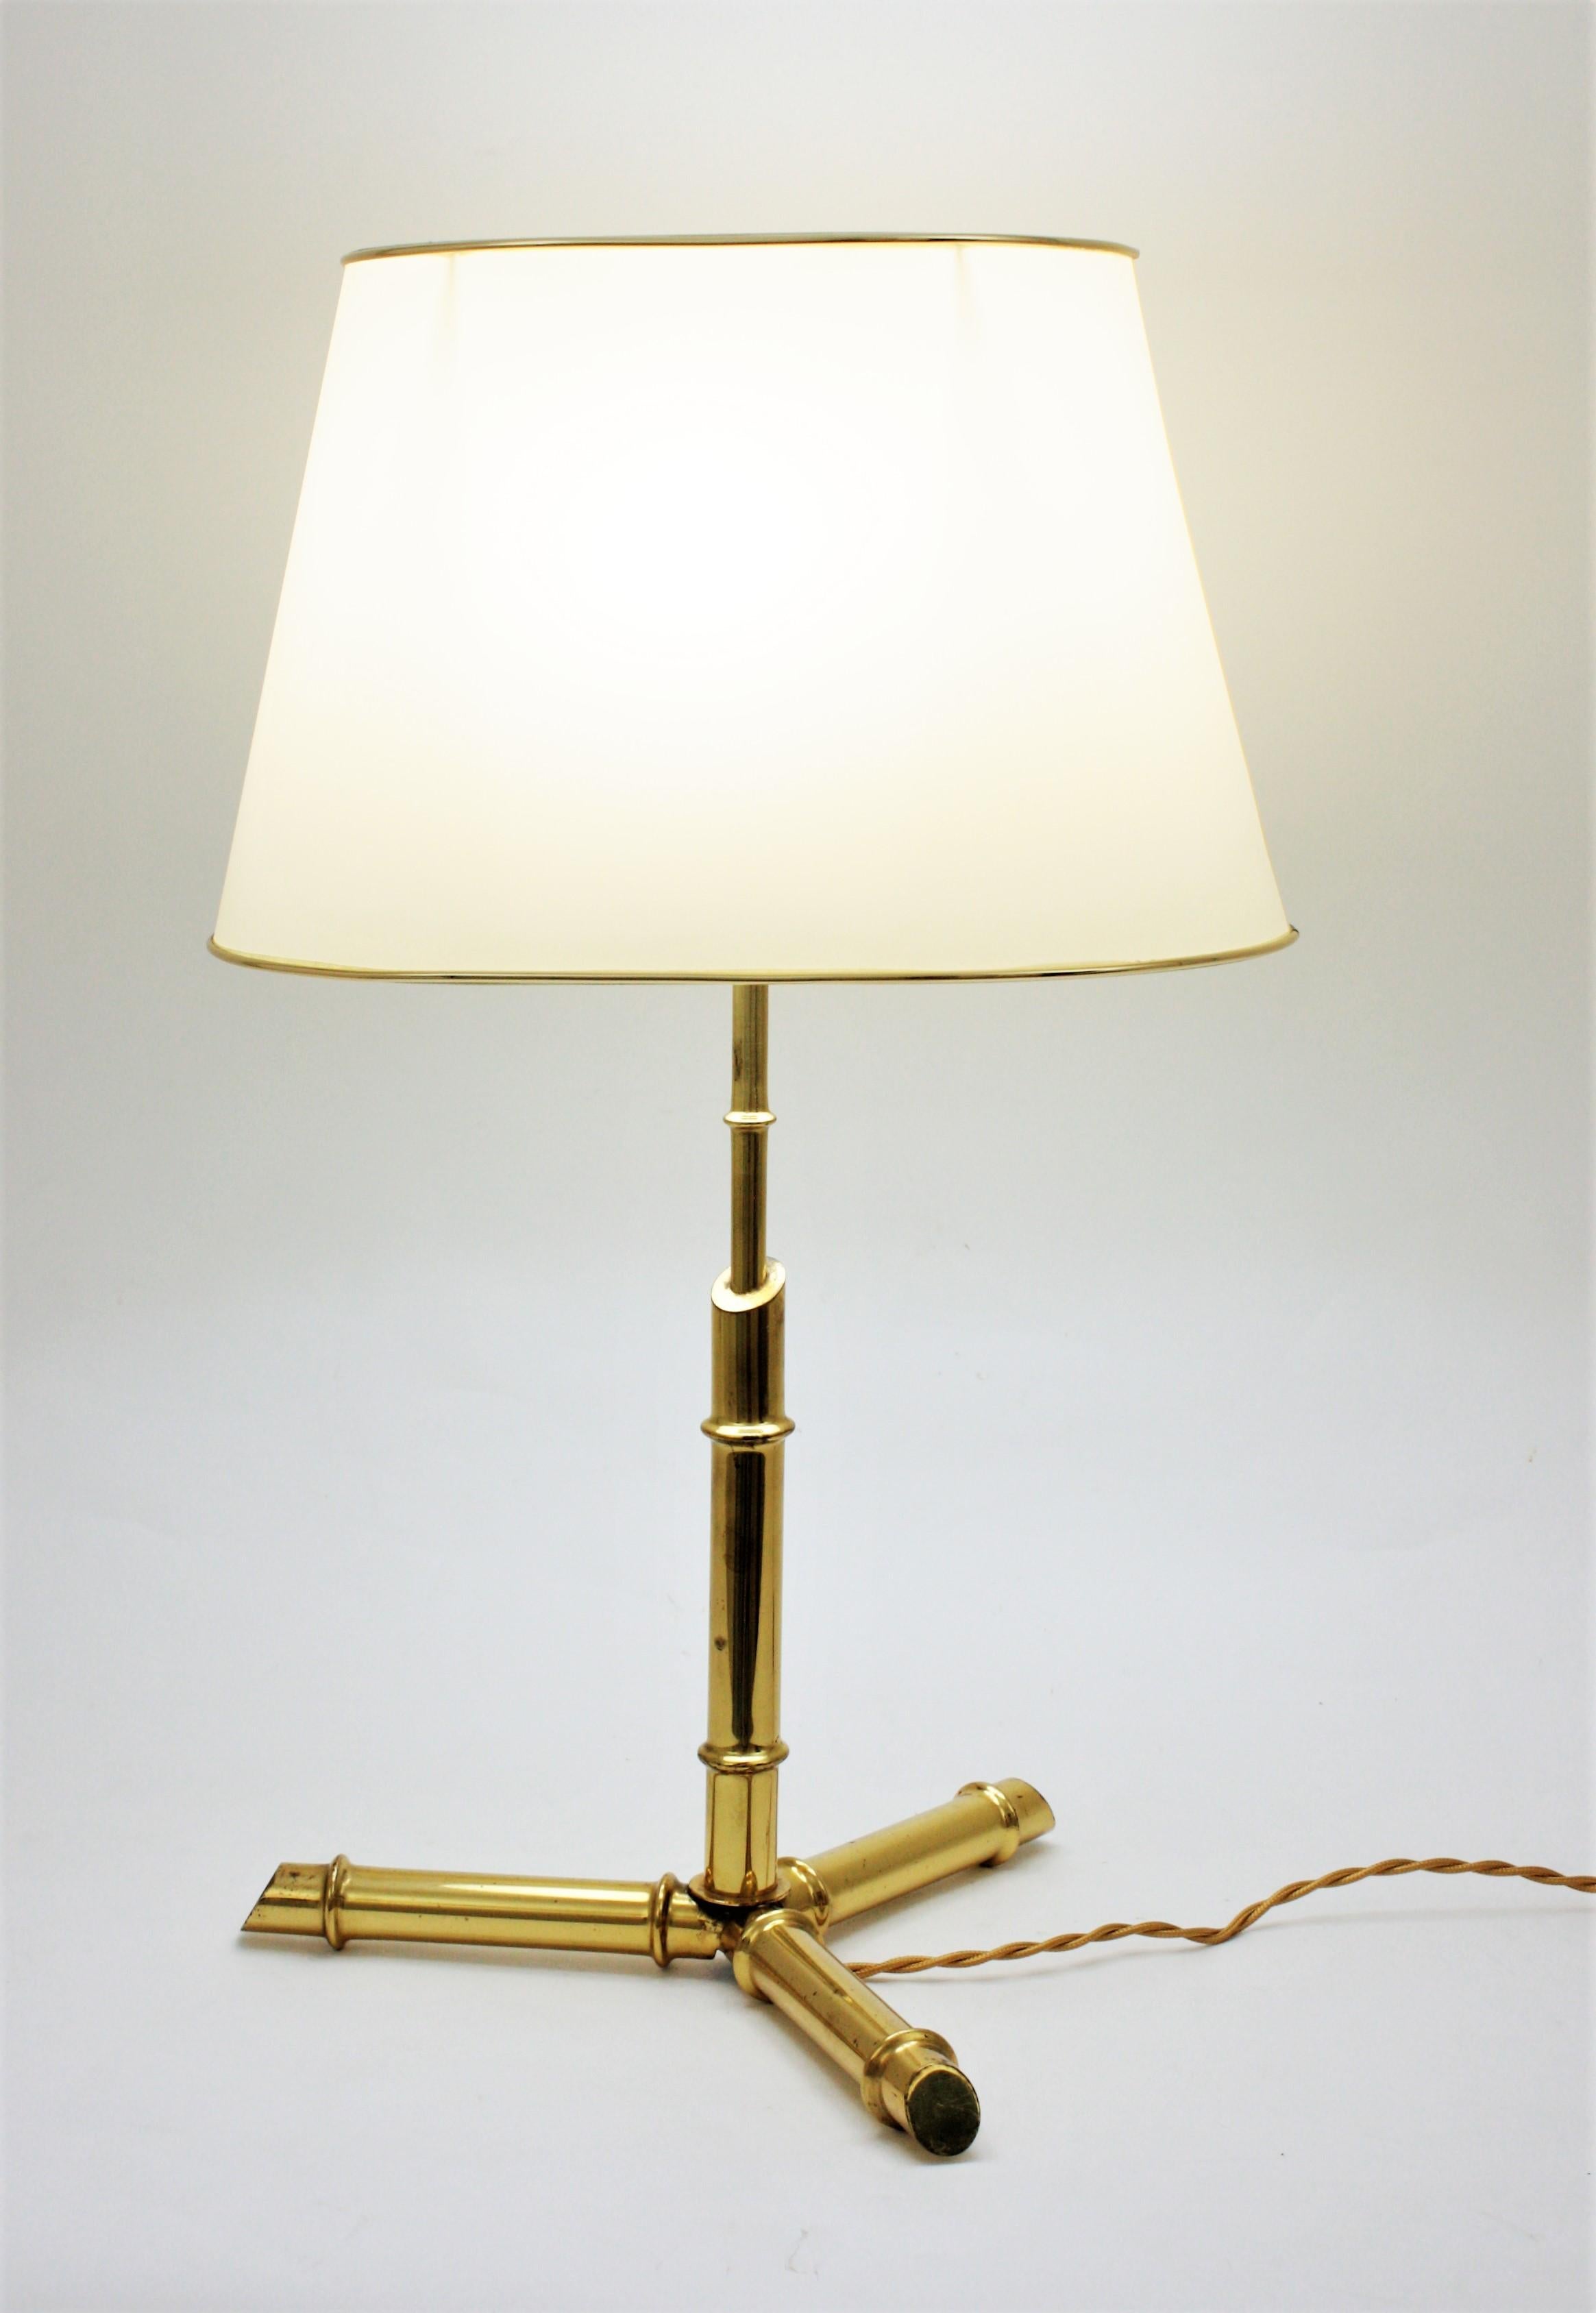 Italian Faux Bamboo Tripod Table Lamp in Brass, 1970s For Sale 1